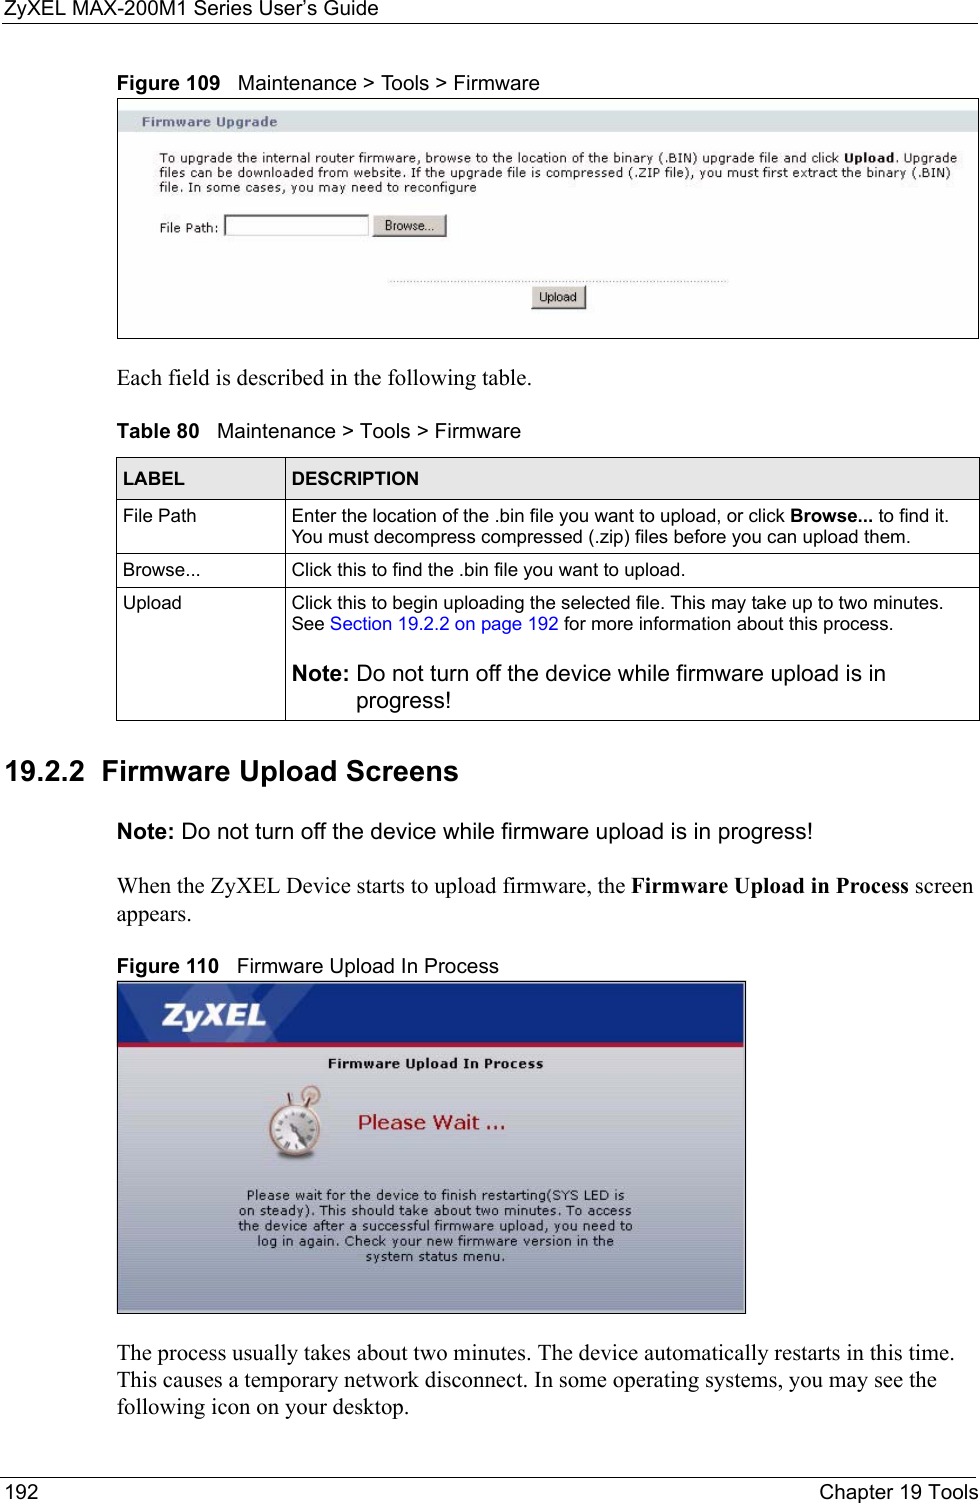 ZyXEL MAX-200M1 Series User’s Guide192 Chapter 19 ToolsFigure 109   Maintenance &gt; Tools &gt; FirmwareEach field is described in the following table.19.2.2  Firmware Upload ScreensNote: Do not turn off the device while firmware upload is in progress!When the ZyXEL Device starts to upload firmware, the Firmware Upload in Process screen appears.Figure 110   Firmware Upload In ProcessThe process usually takes about two minutes. The device automatically restarts in this time. This causes a temporary network disconnect. In some operating systems, you may see the following icon on your desktop.Table 80   Maintenance &gt; Tools &gt; FirmwareLABEL DESCRIPTIONFile Path  Enter the location of the .bin file you want to upload, or click Browse... to find it. You must decompress compressed (.zip) files before you can upload them.Browse...  Click this to find the .bin file you want to upload.Upload  Click this to begin uploading the selected file. This may take up to two minutes. See Section 19.2.2 on page 192 for more information about this process.Note: Do not turn off the device while firmware upload is in progress!